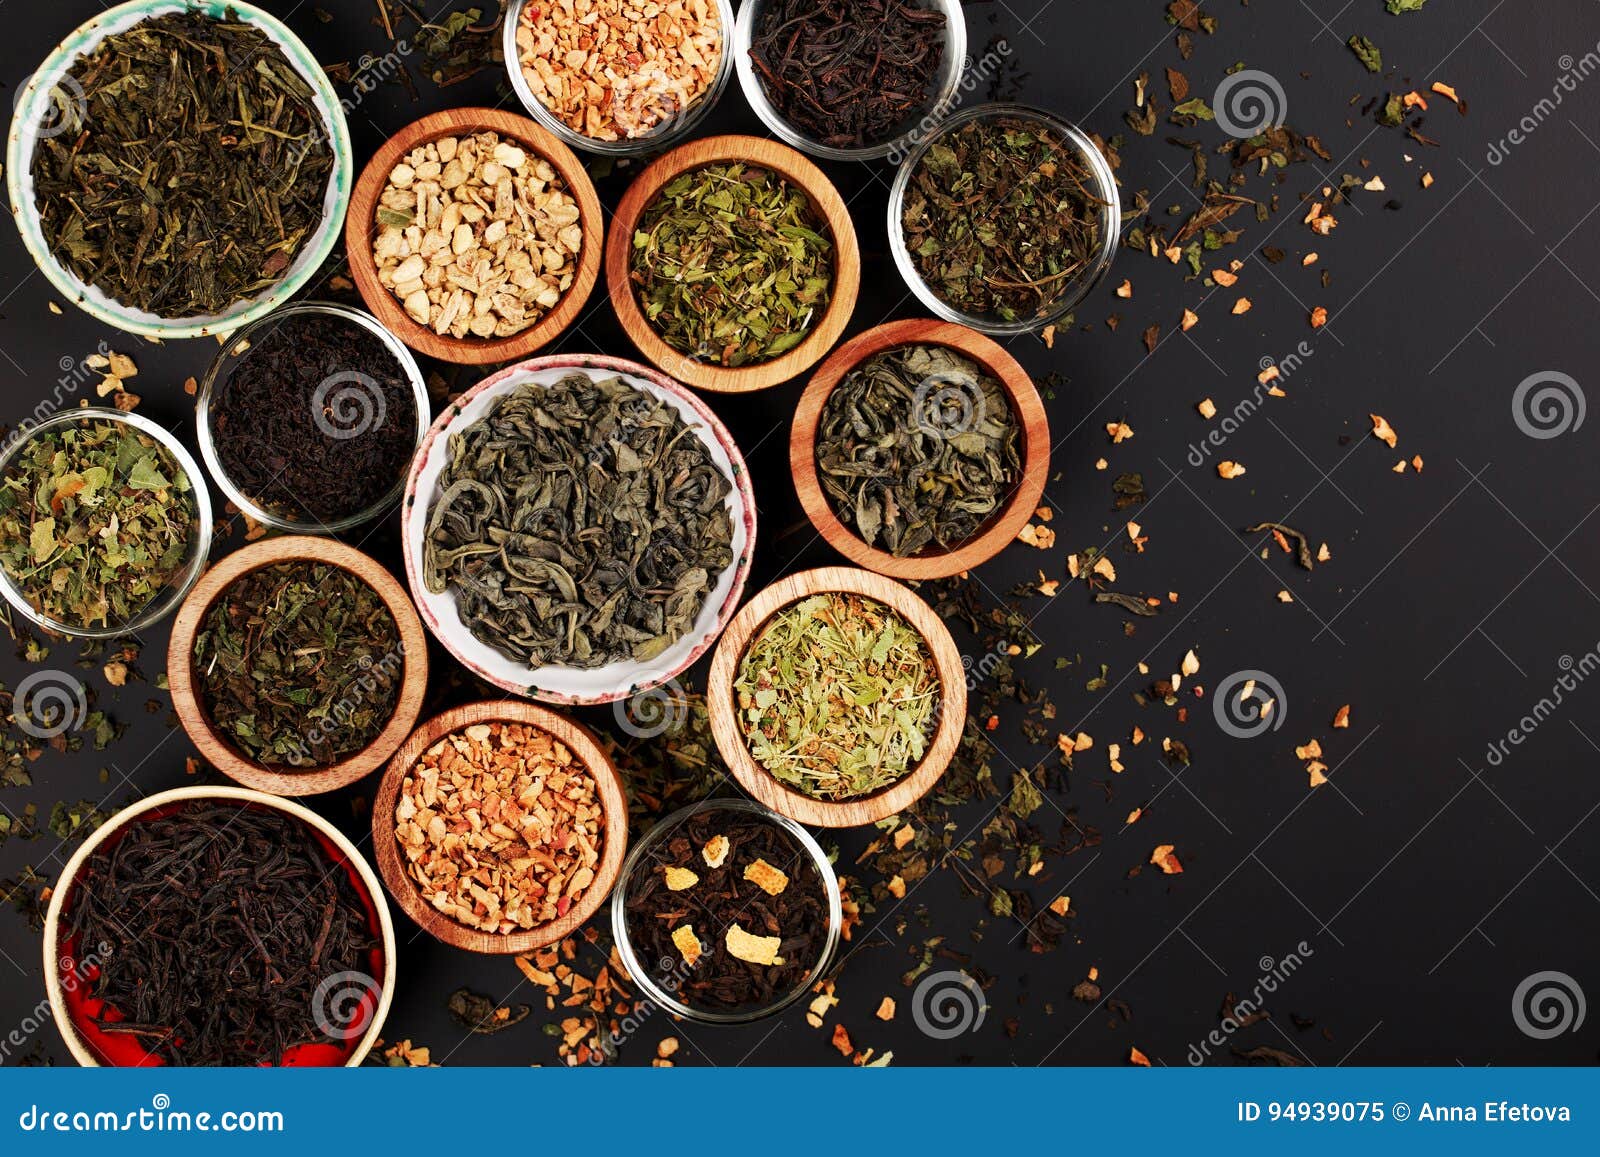 Assortment of Dry Tea in Little Bowls Stock Image - Image of bowl ...